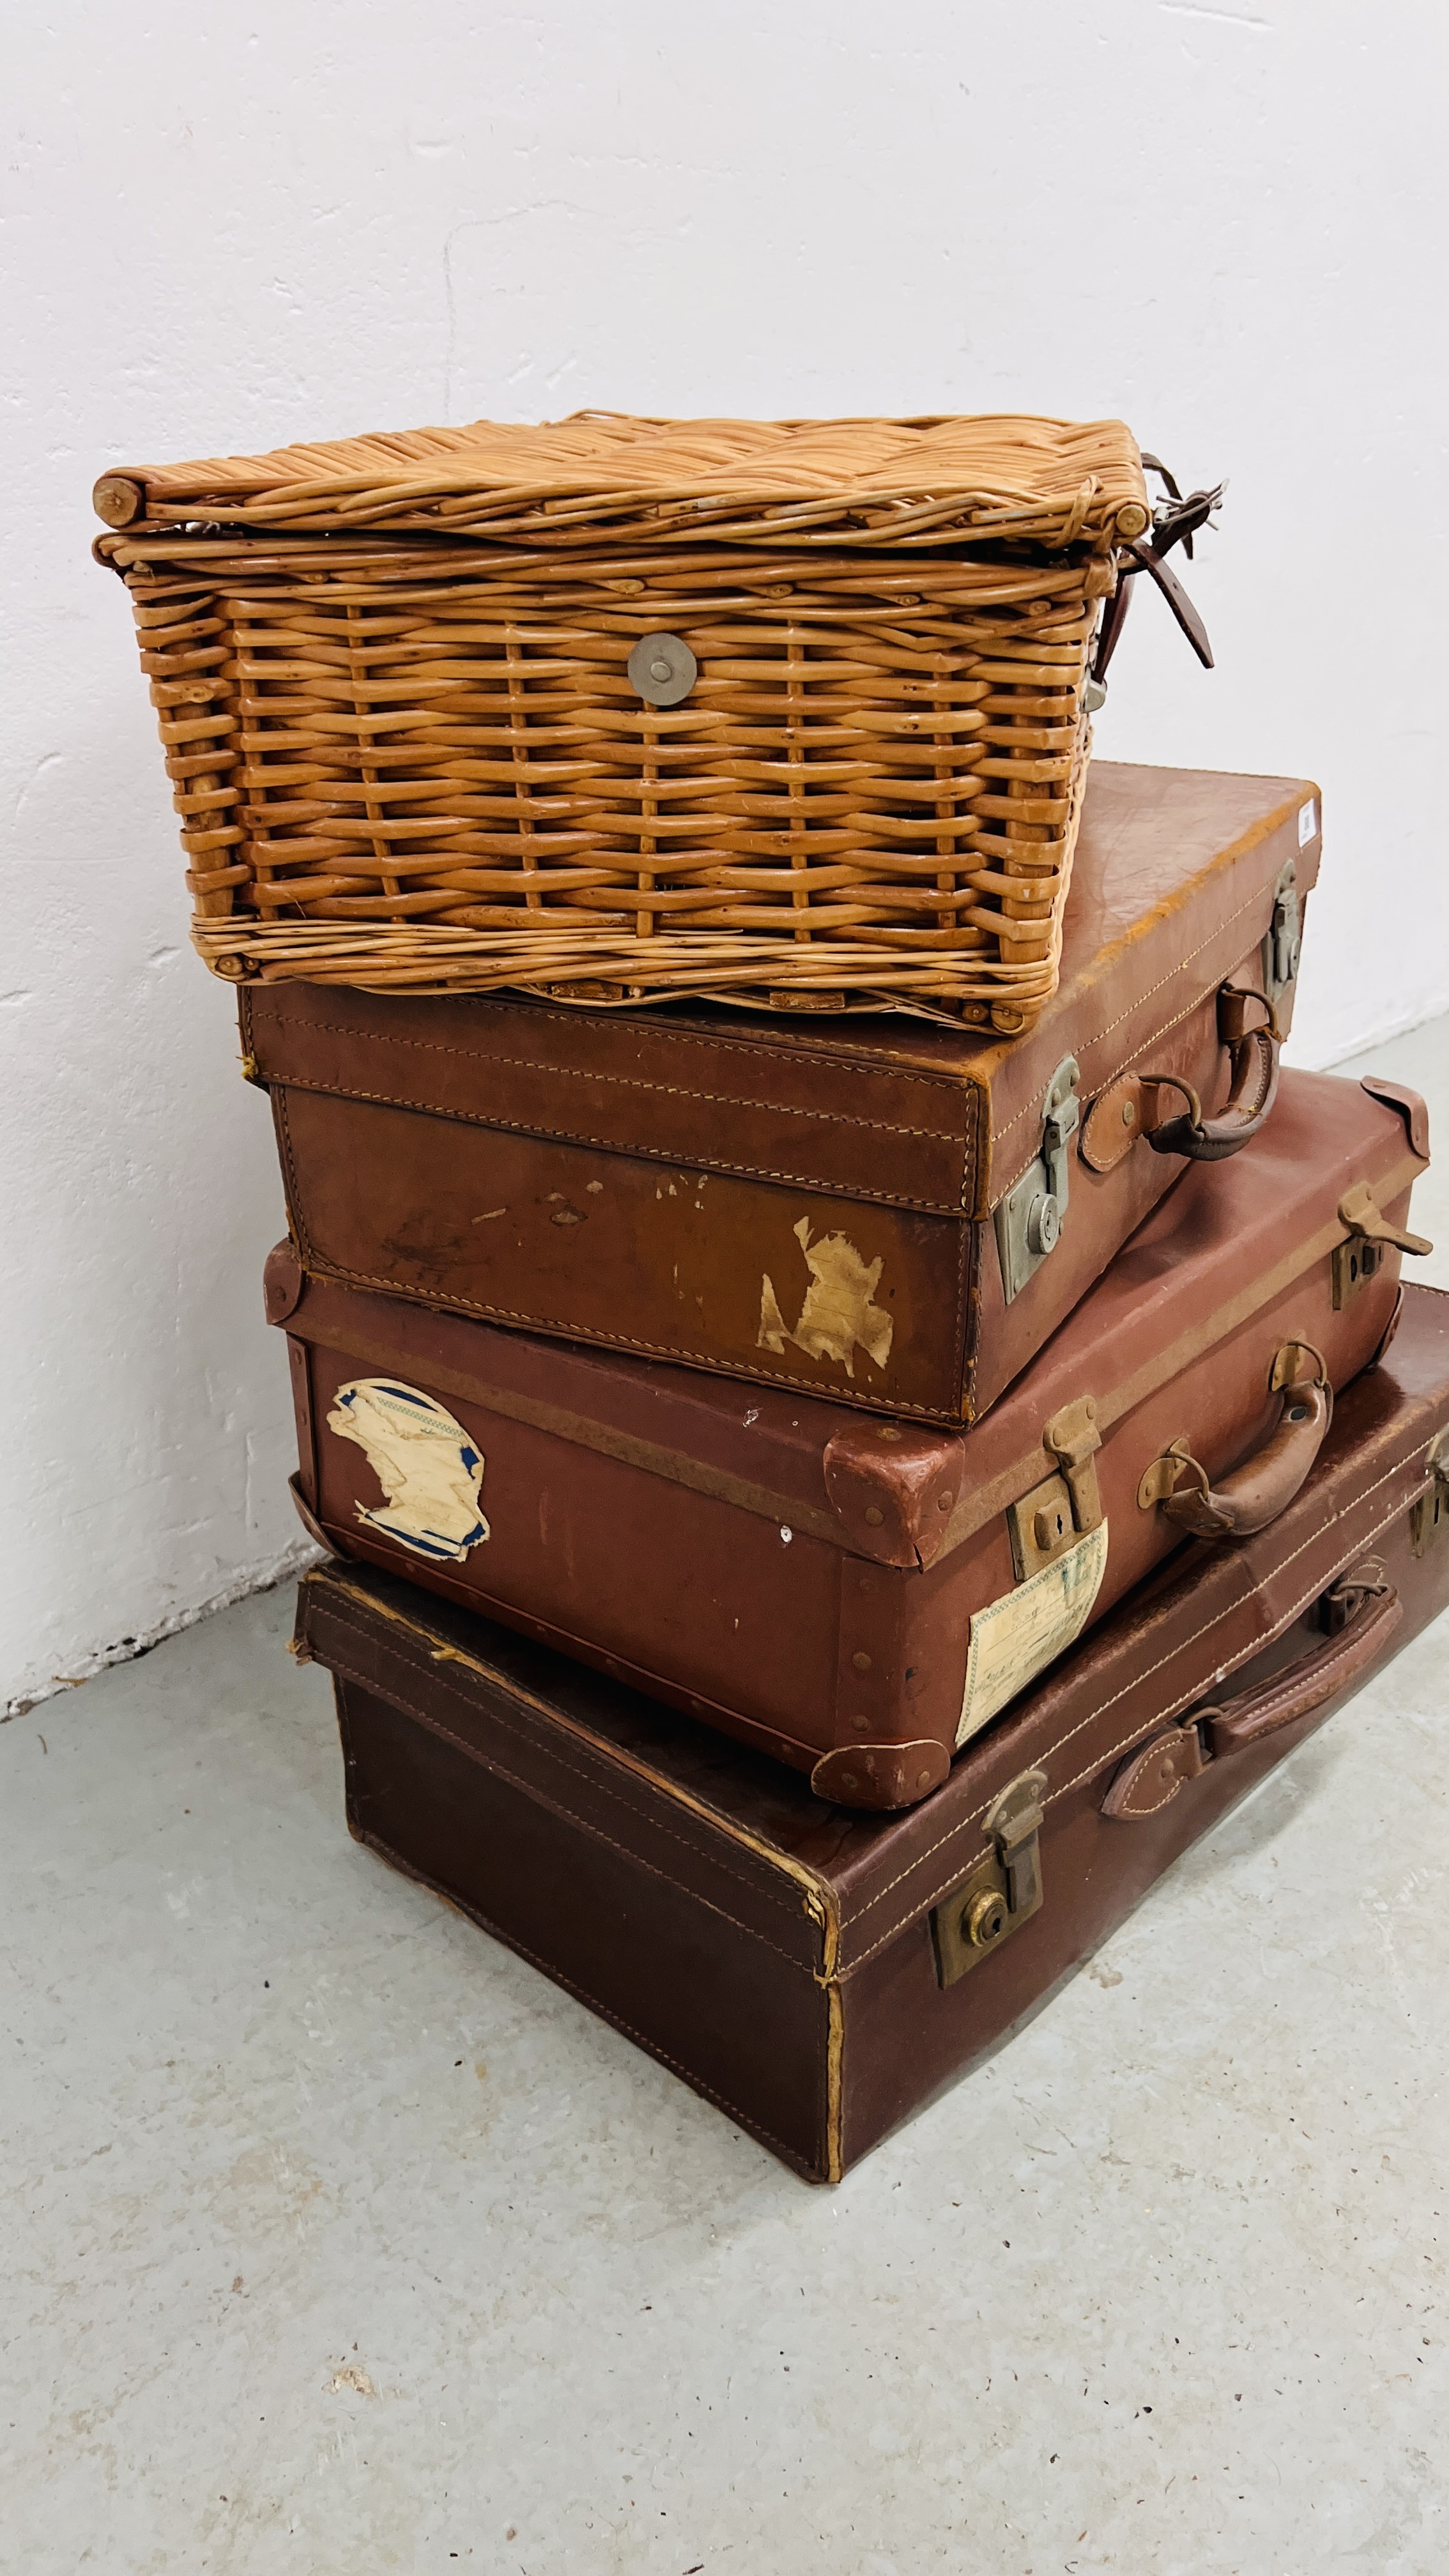 A GROUP OF THREE VINTAGE SUITCASES ALONG WITH A WICKER PICNIC BASKET - Image 6 of 7